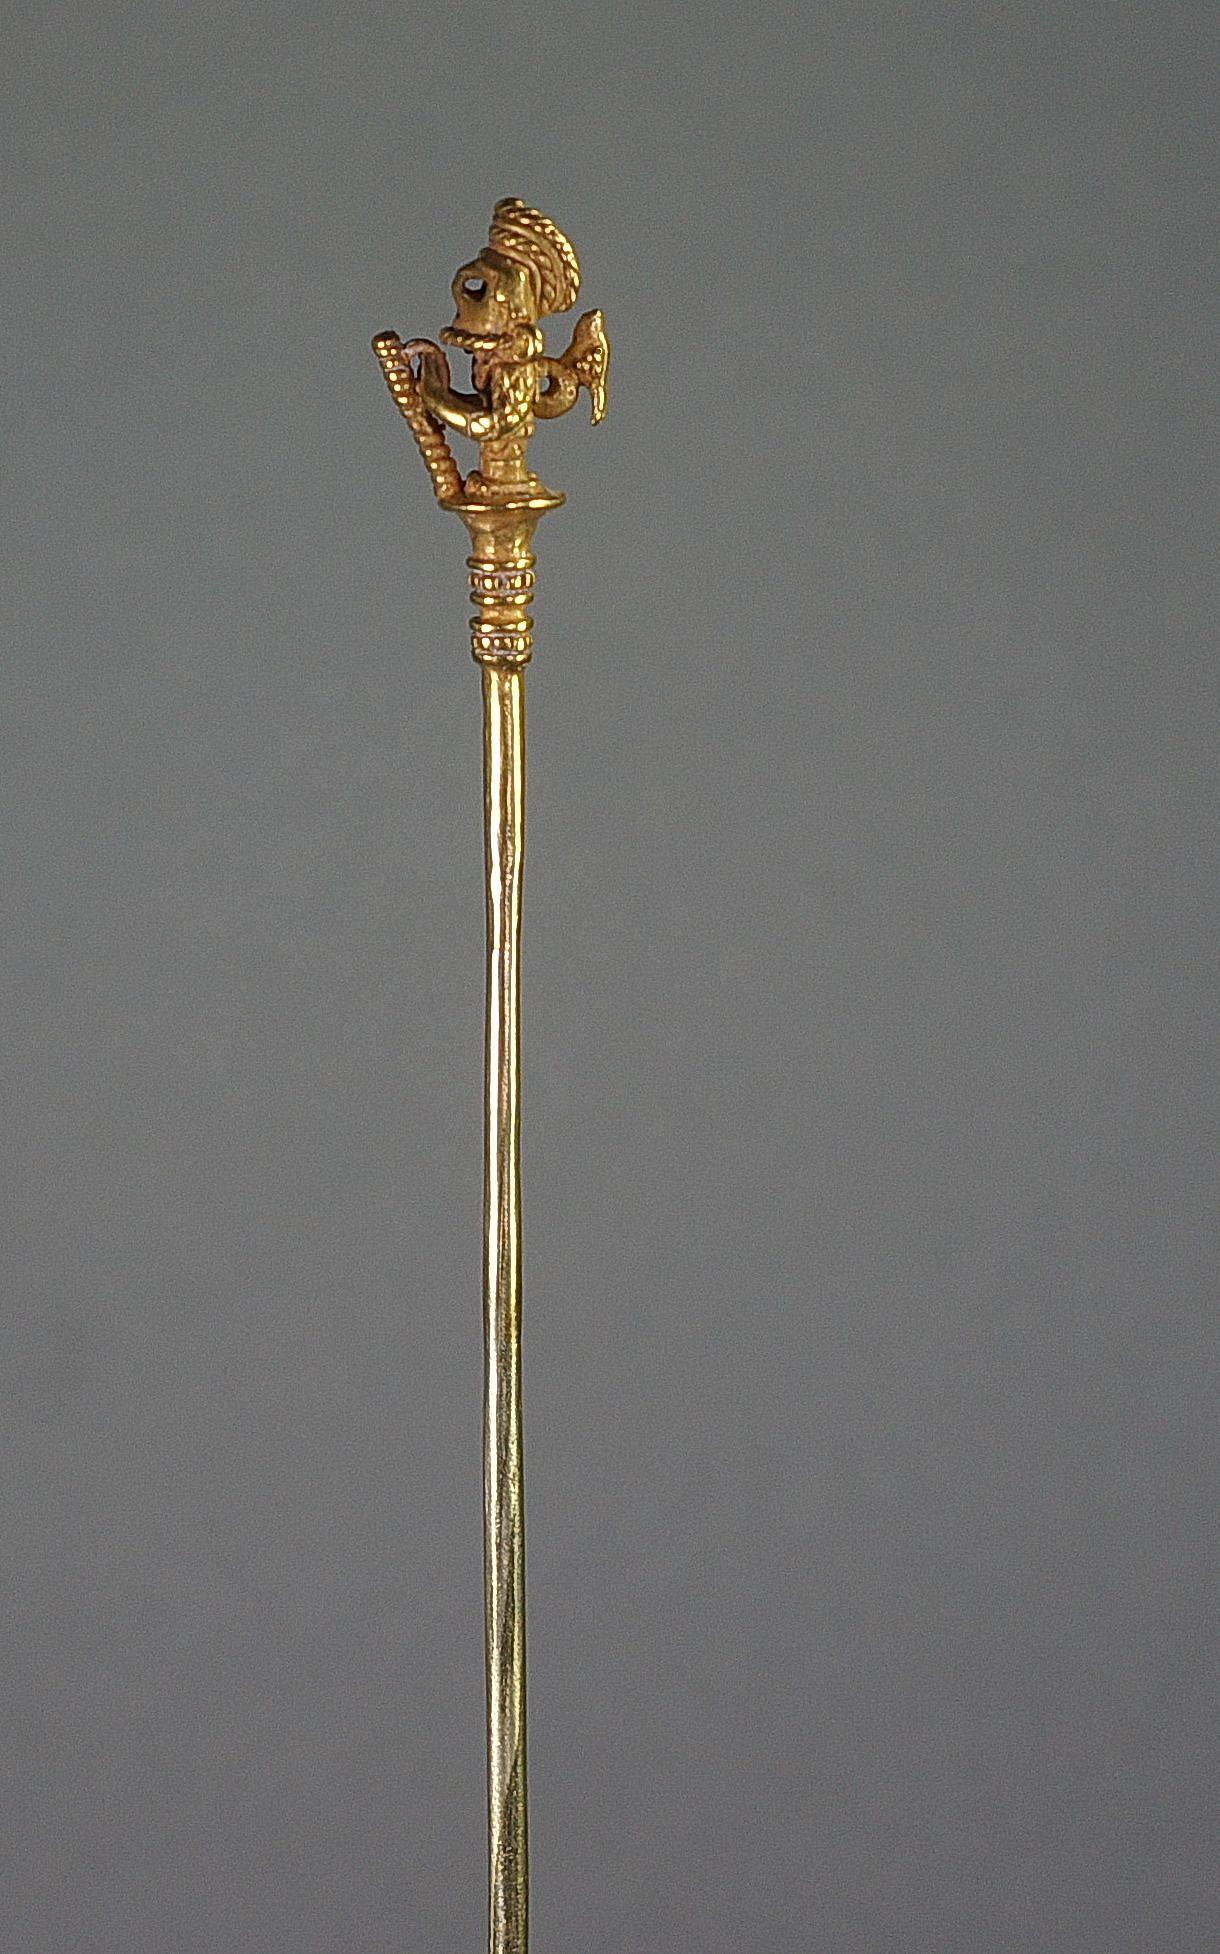 Colombia, Calima Cast Gold Lime Dipper of a Warrior with Animal Perched on Back
Finely cast with tapering shaft terminating in two bands of granulation. Elaborate helmeted warrior wearing a mask and holding a staff with both hands, curving headdress and miniature animal perched on back.  According to the research, only limited types of images were used for lime dippers, usually shamans or warriors.  See "Calima and Malagana," by Marianne Cardale Schrimpff, p. 115, plate 111.34 for a similar example.  Excellent example of lost wax casting.  Sotheby’s, New York, private collector, prior to 2000.
Media: Metal
Dimensions: Height: 8 1/4"
$14,750
MM618